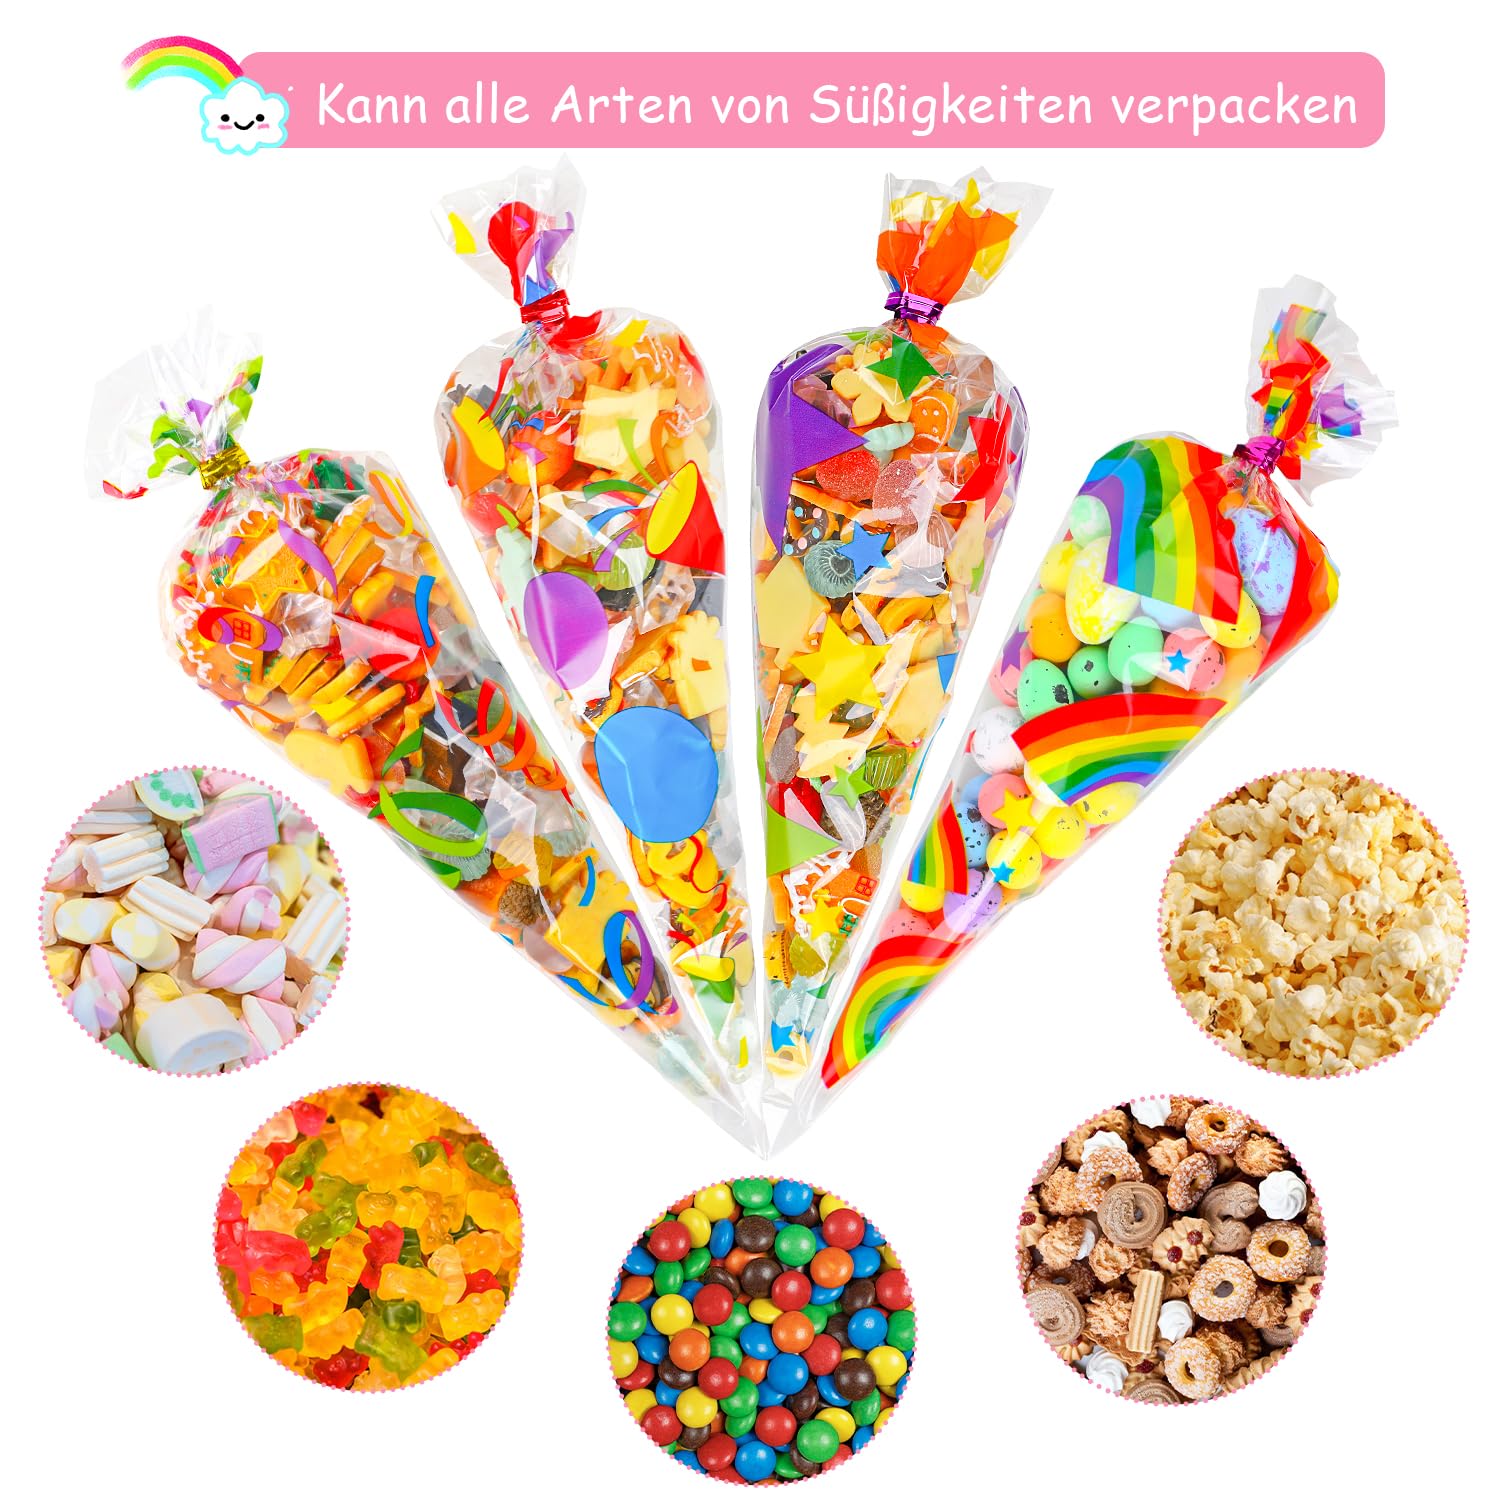 VEYLIN Rainbow Clear Cone Bags,120 Pieces Rainbow Cellophane Sweets Cone Bags With Twist Ties For Party,Birthday,Party Favor Supplies